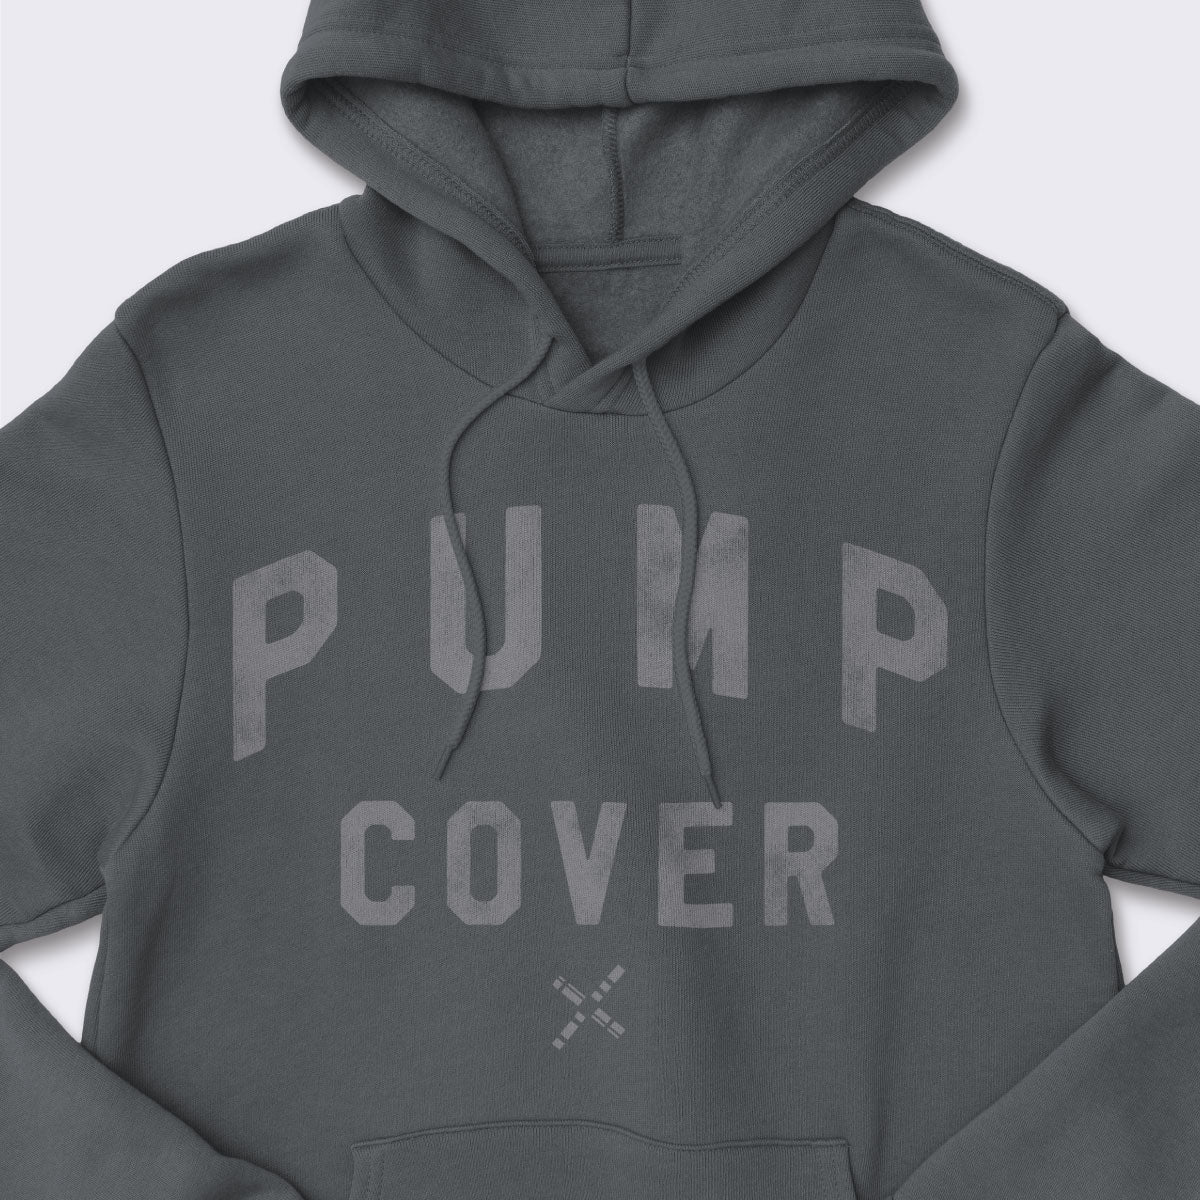 Pump Cover Core Fleece Pullover Hooded Sweatshirt - The LFT Clothing Company